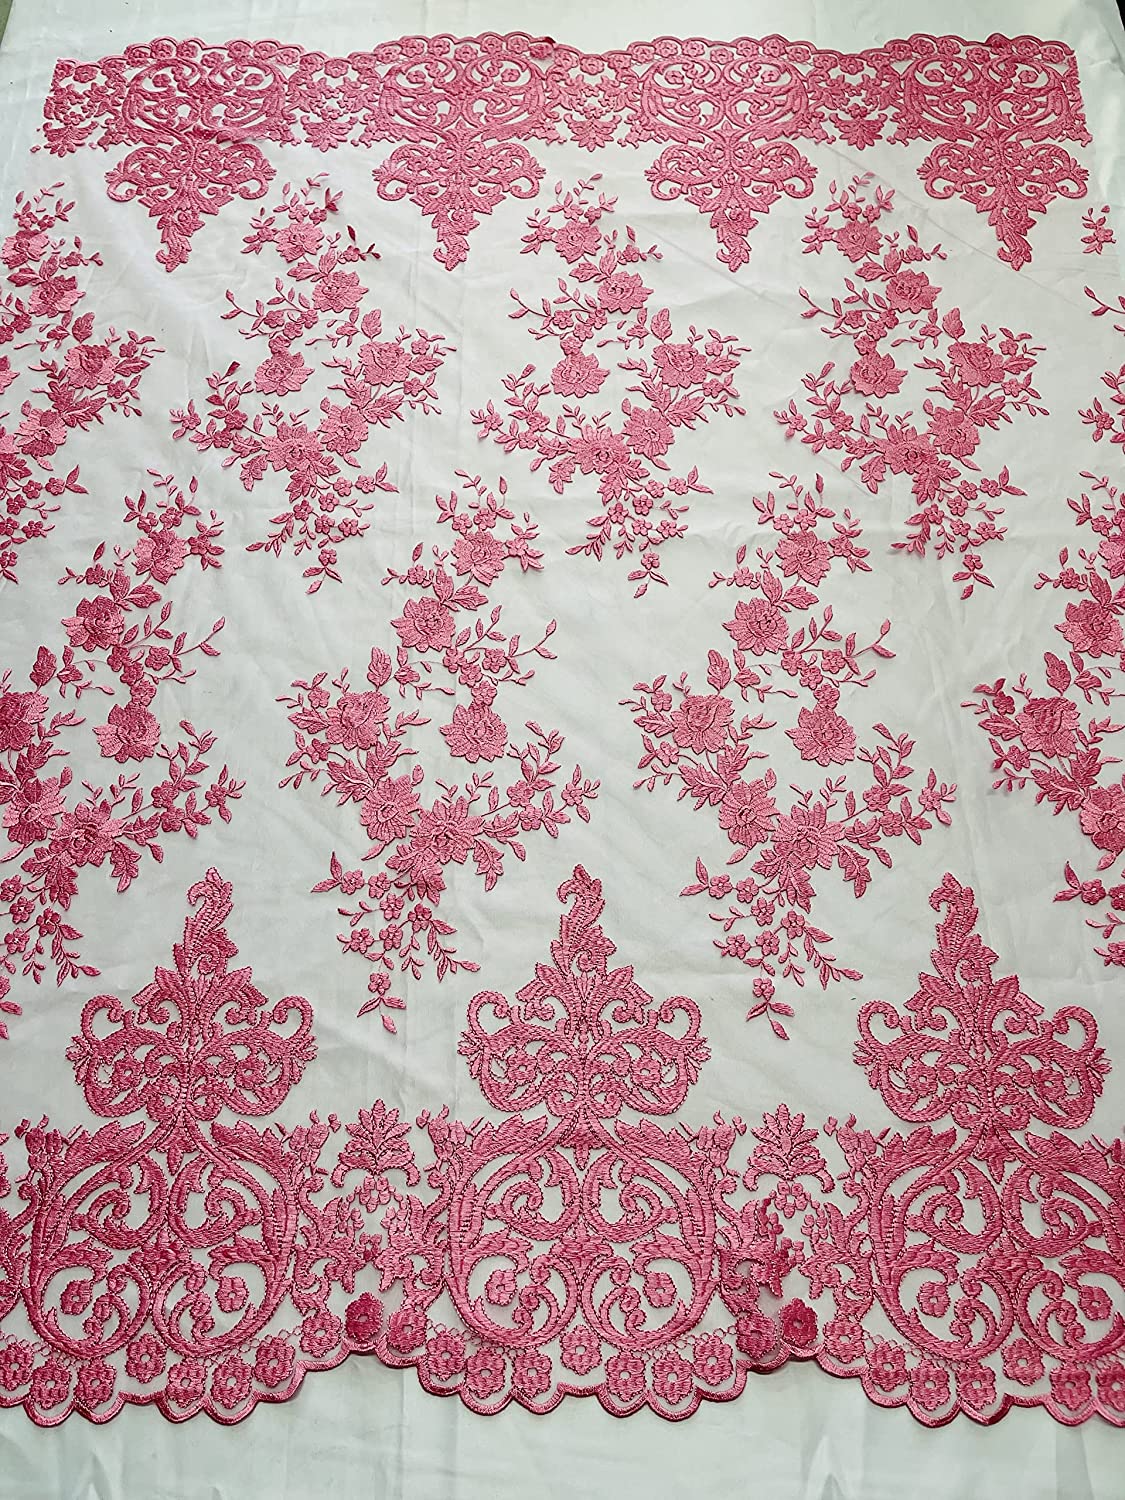 54" Wide Elegant Flower Damask Flat Lace Embroidery On A Mesh (1 Yard, Candy Pink)